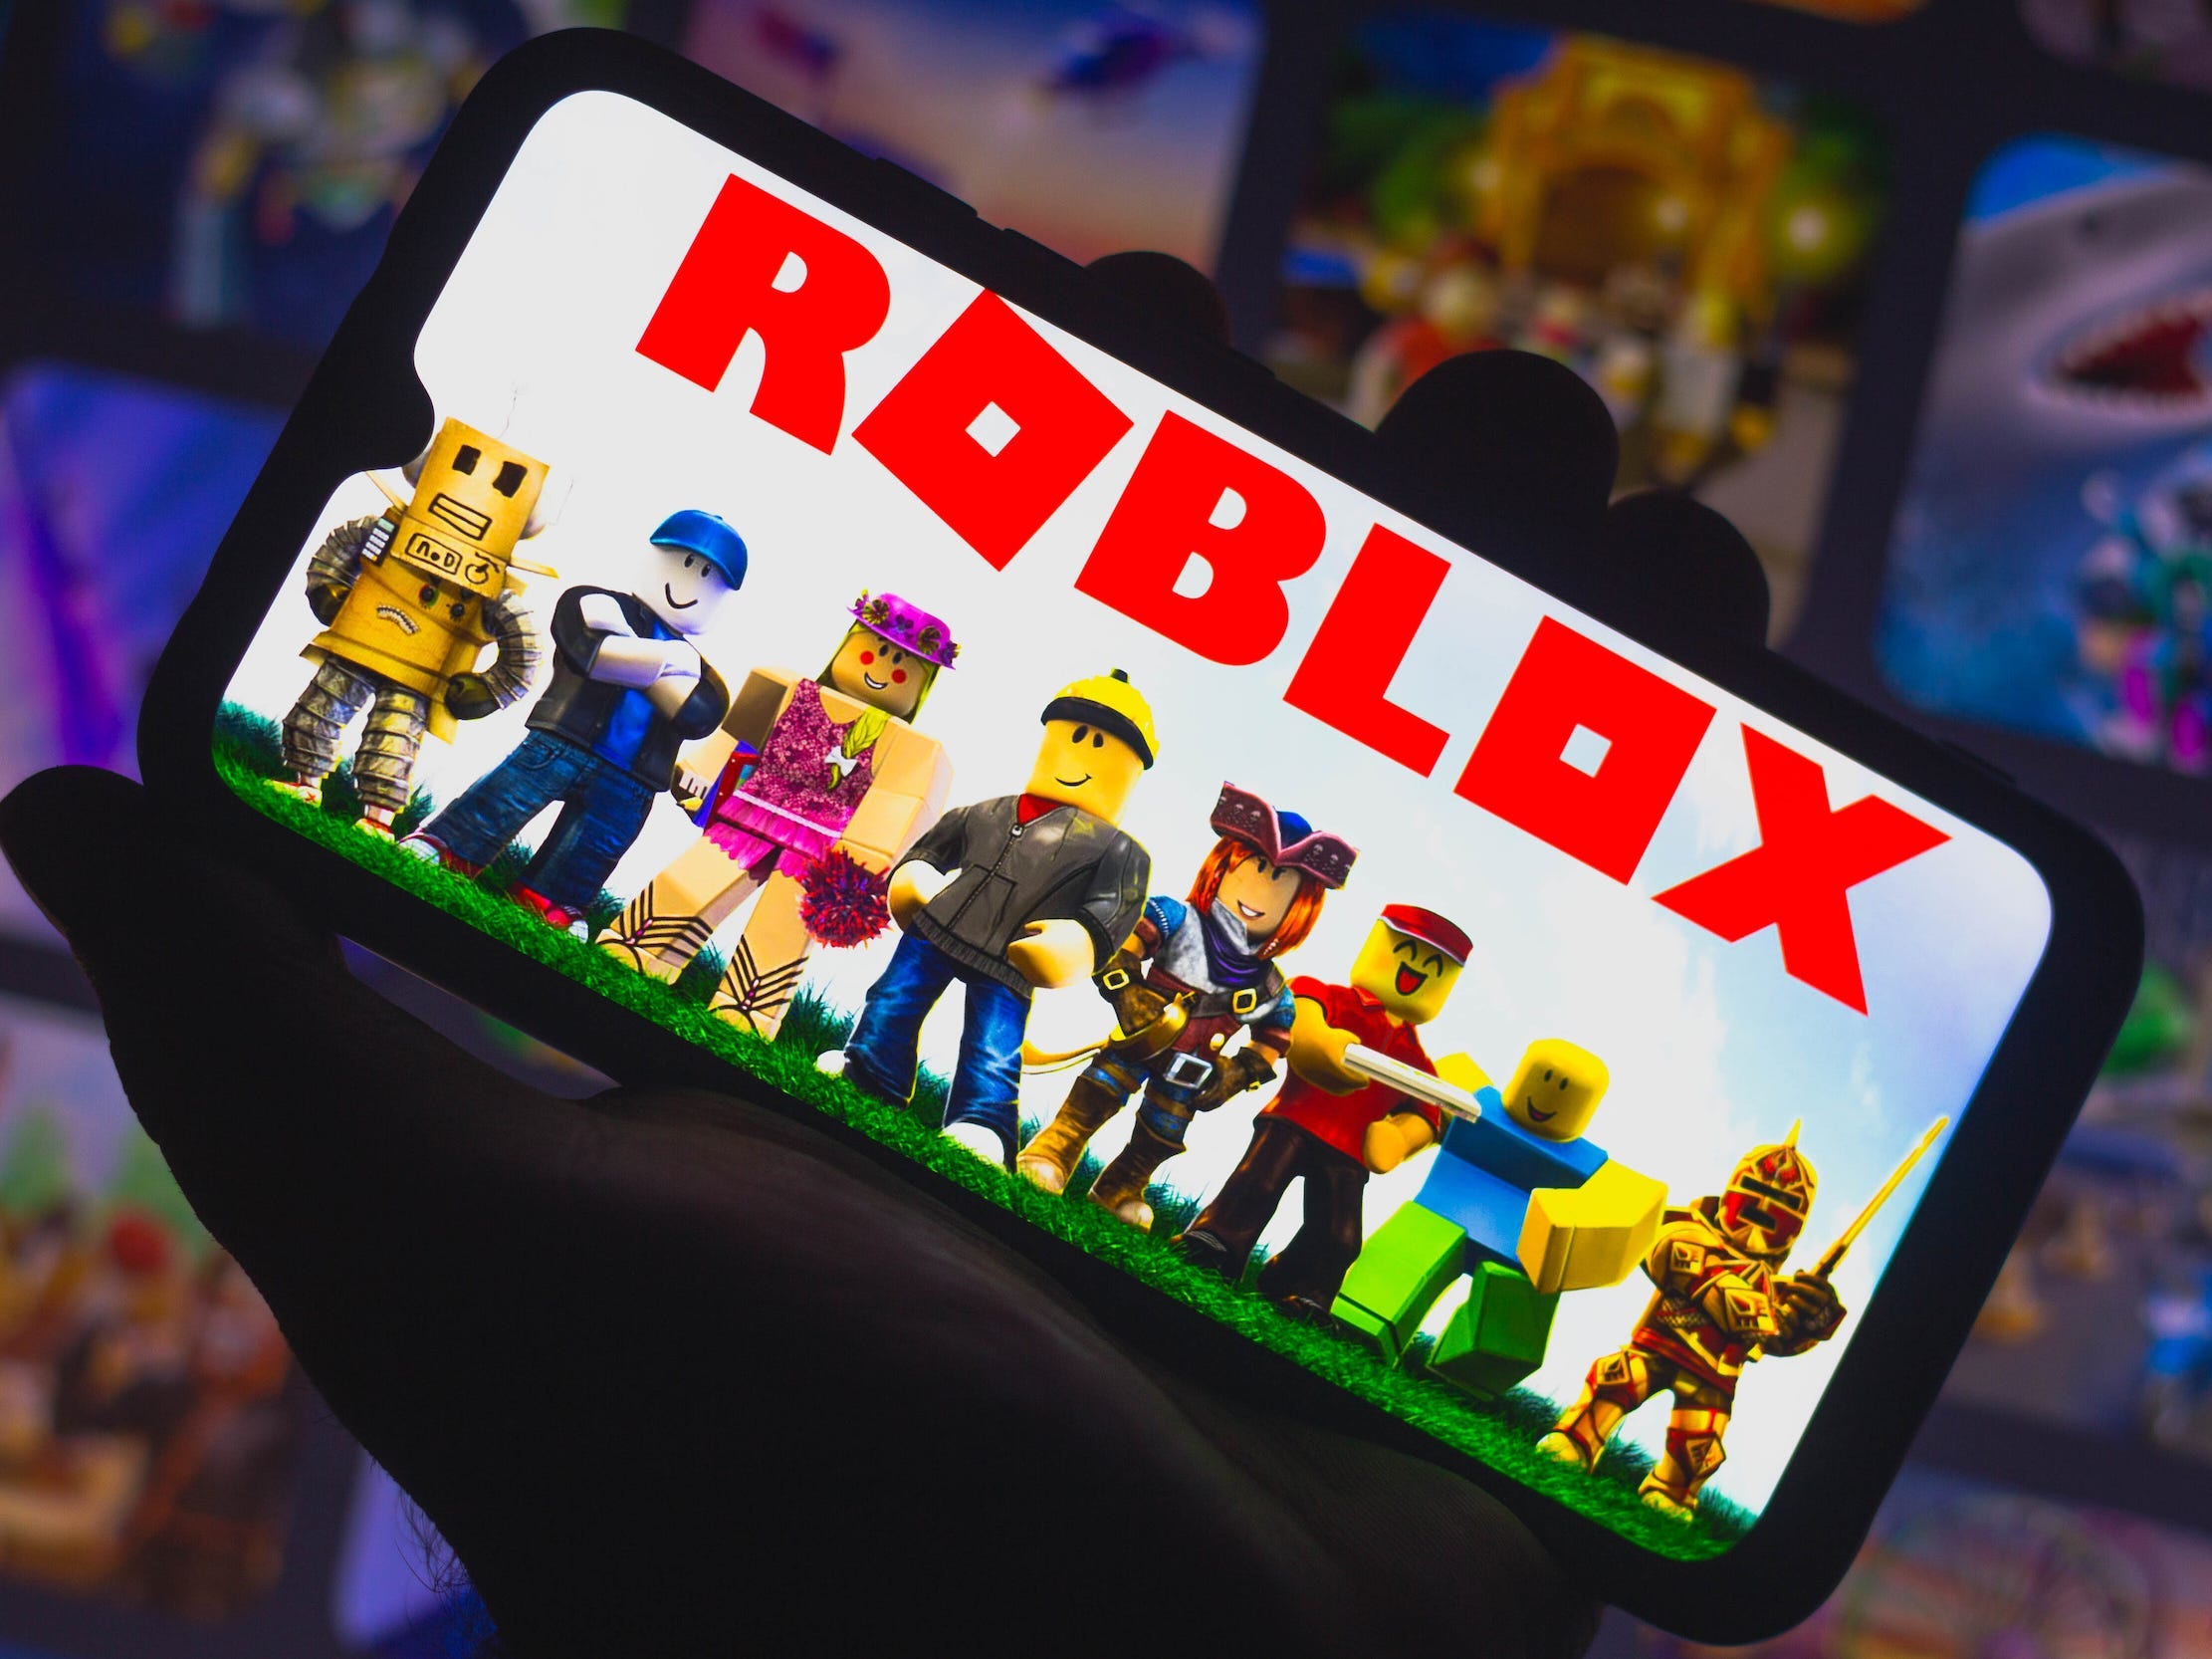 HOW TO REFUND ITEMS IN ROBLOX 2021